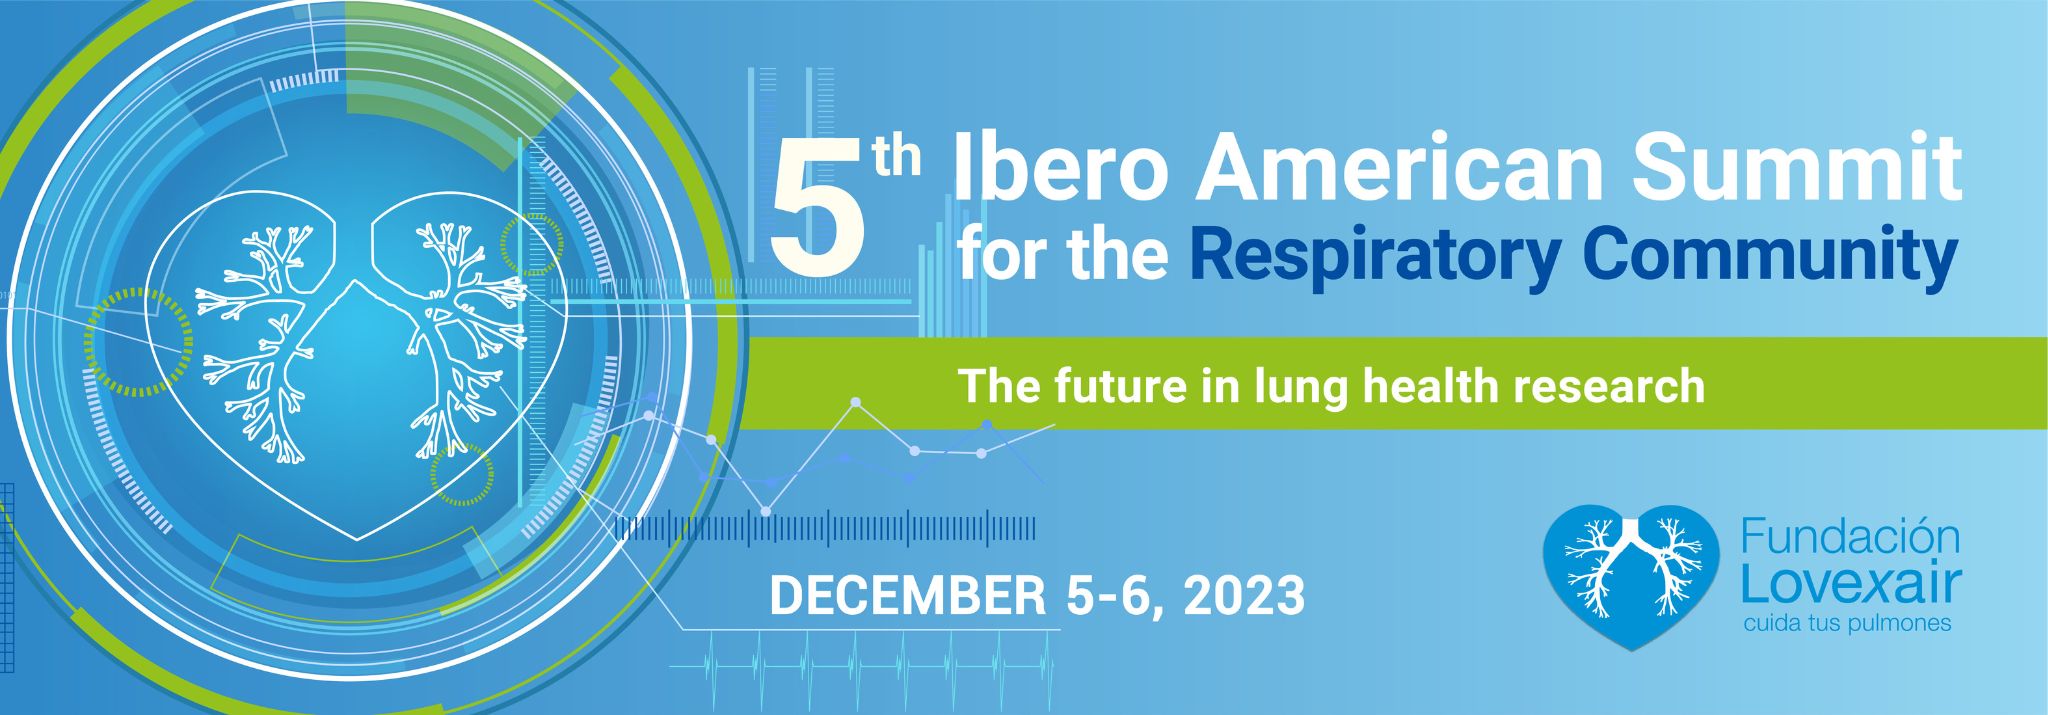 Join Lovexair Foundation at the 5th Ibero-American Summit for the Respiratory Community